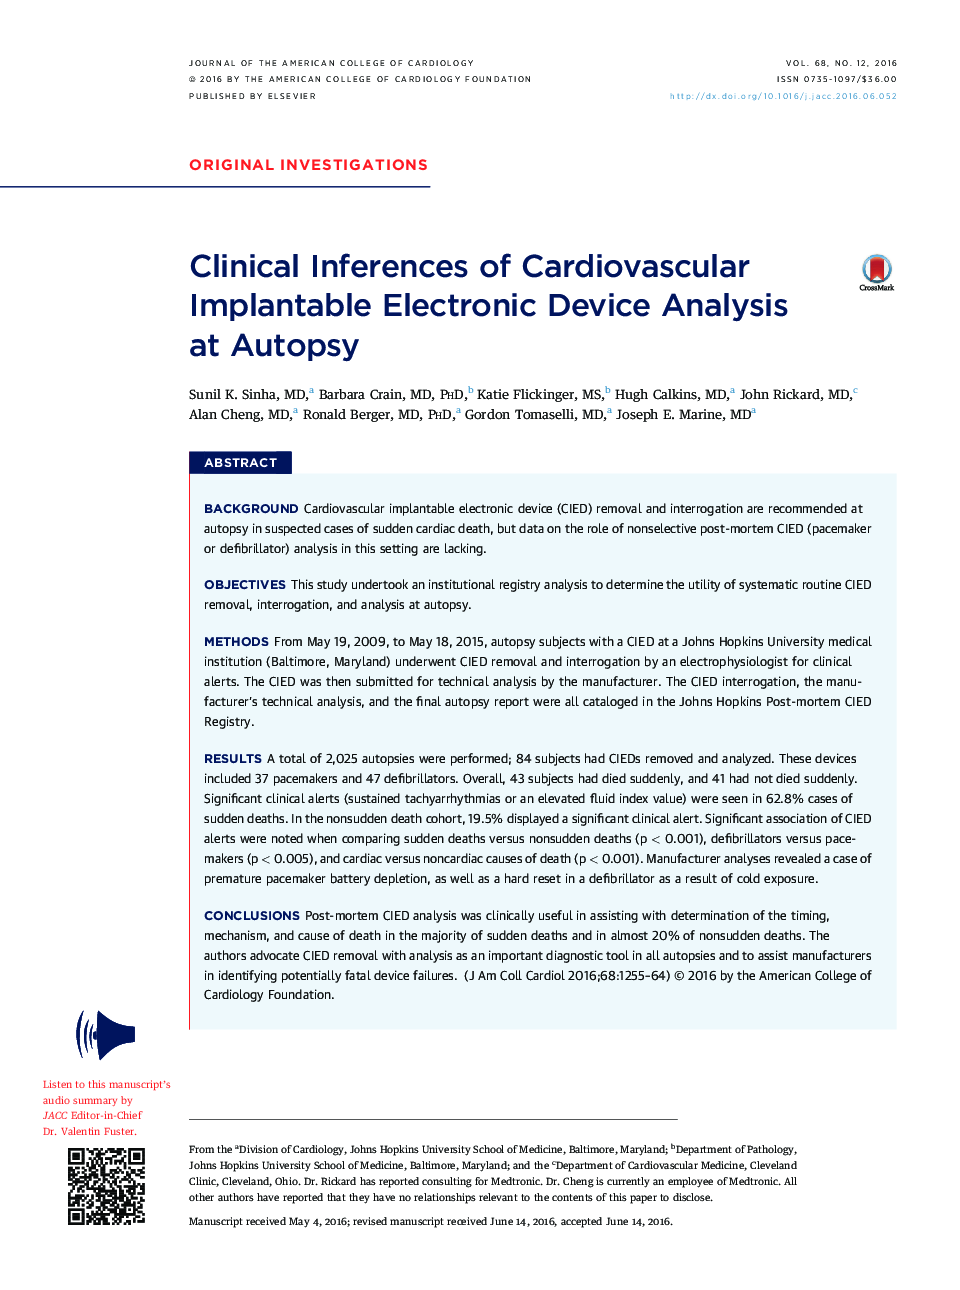 Clinical Inferences of Cardiovascular Implantable Electronic Device Analysis atÂ Autopsy